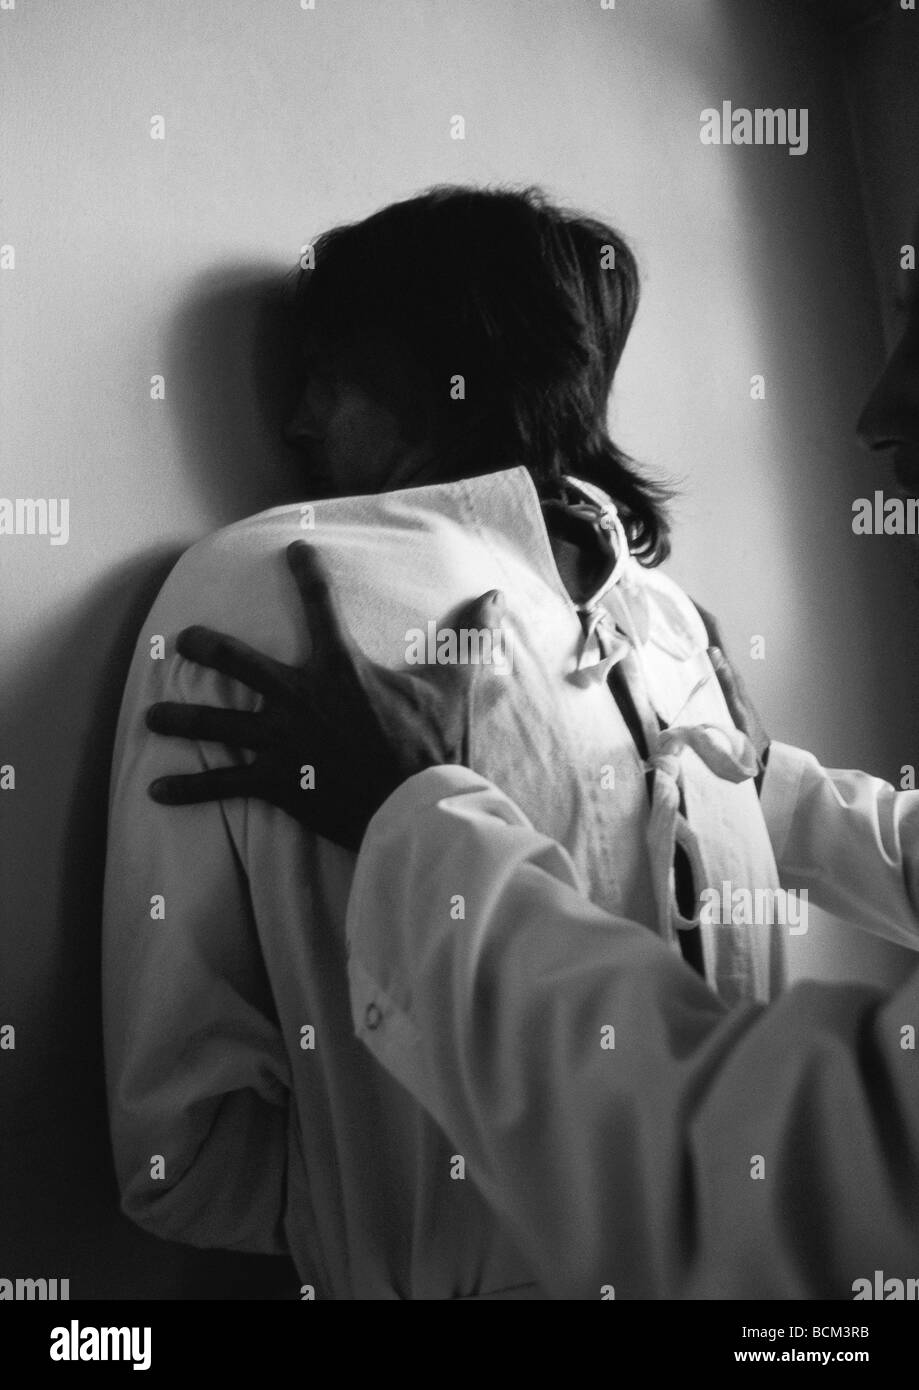 Orderly holding man in straitjacket against wall Stock Photo